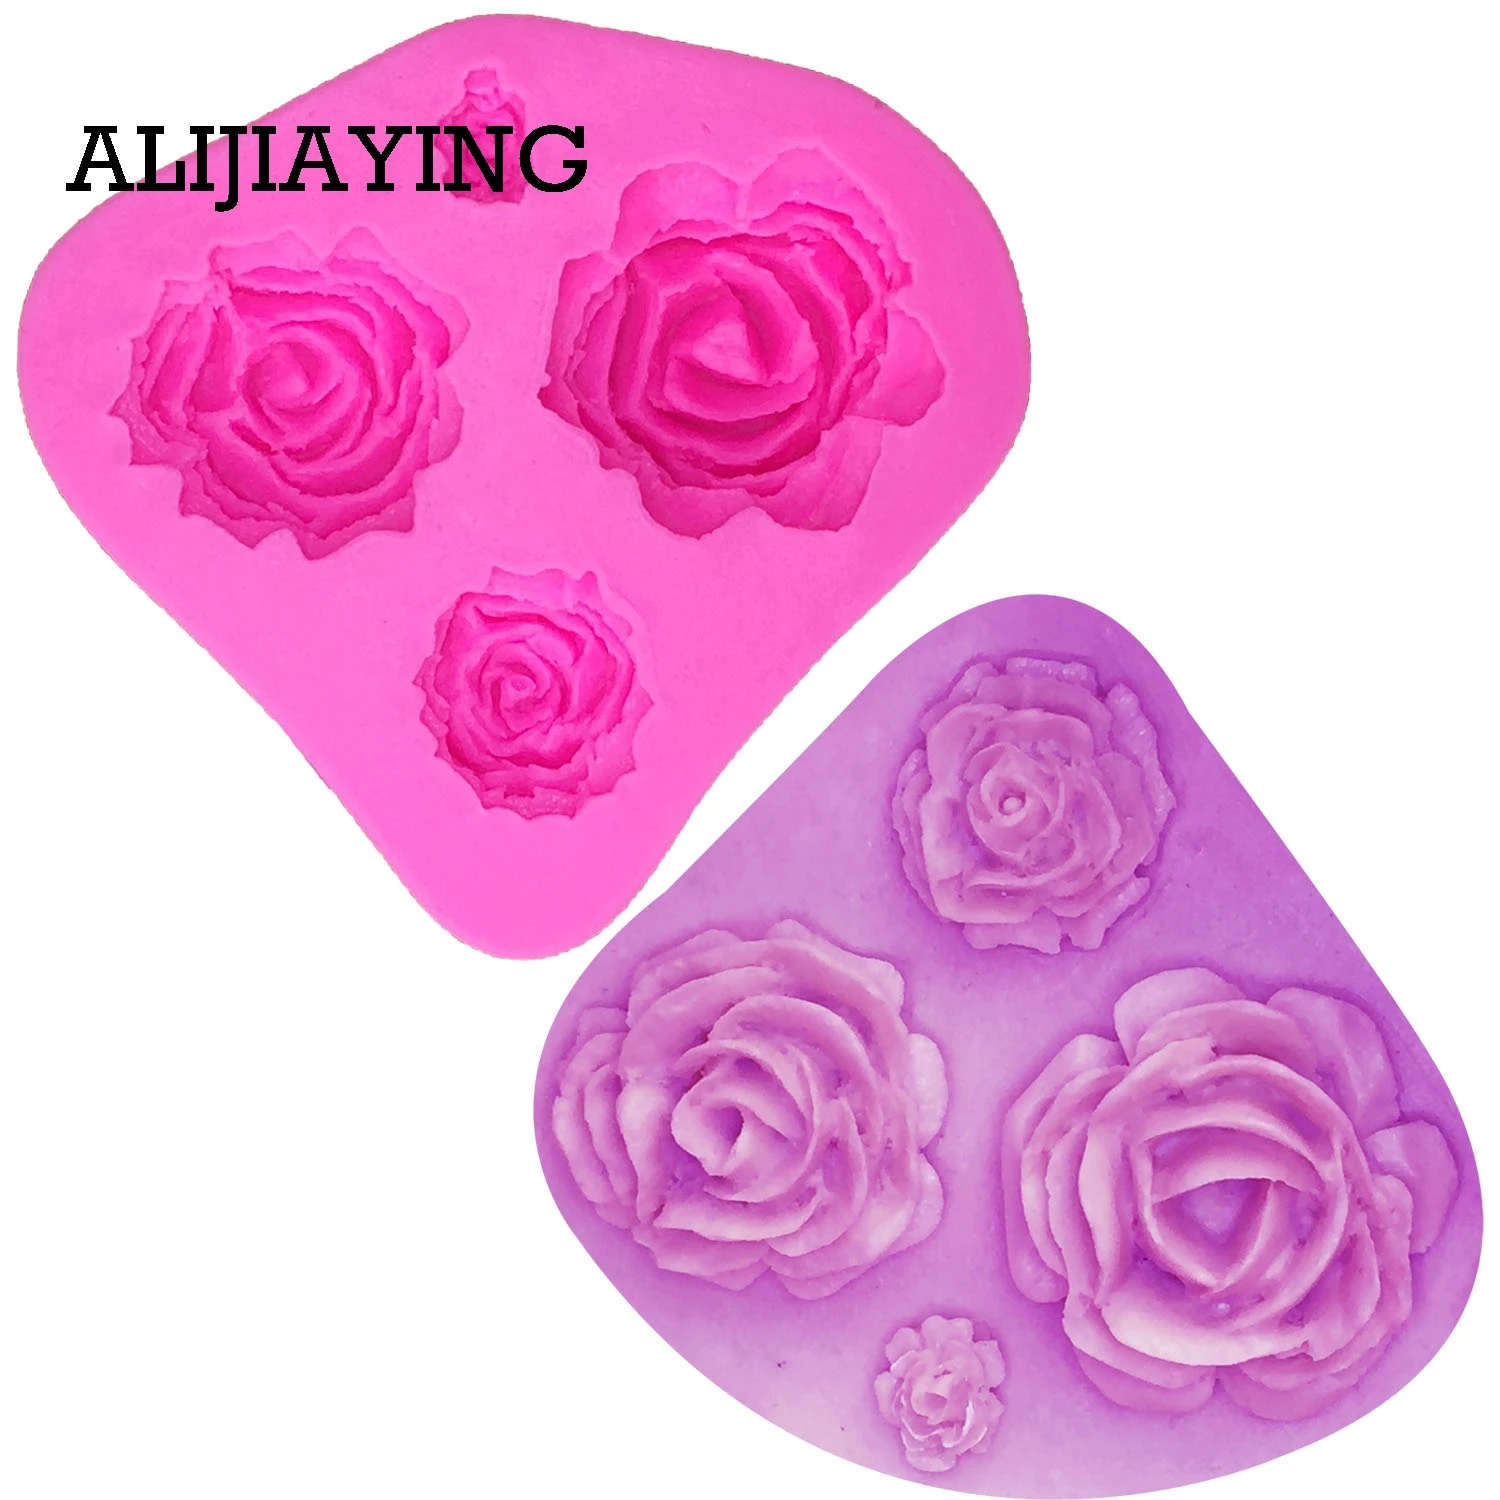 

M0116 3D Rose Flower Silicone Mold Fondant Cake Decorating Chocolate Cookie Fimo Polymer Clay Resin Baking Molds For Cake